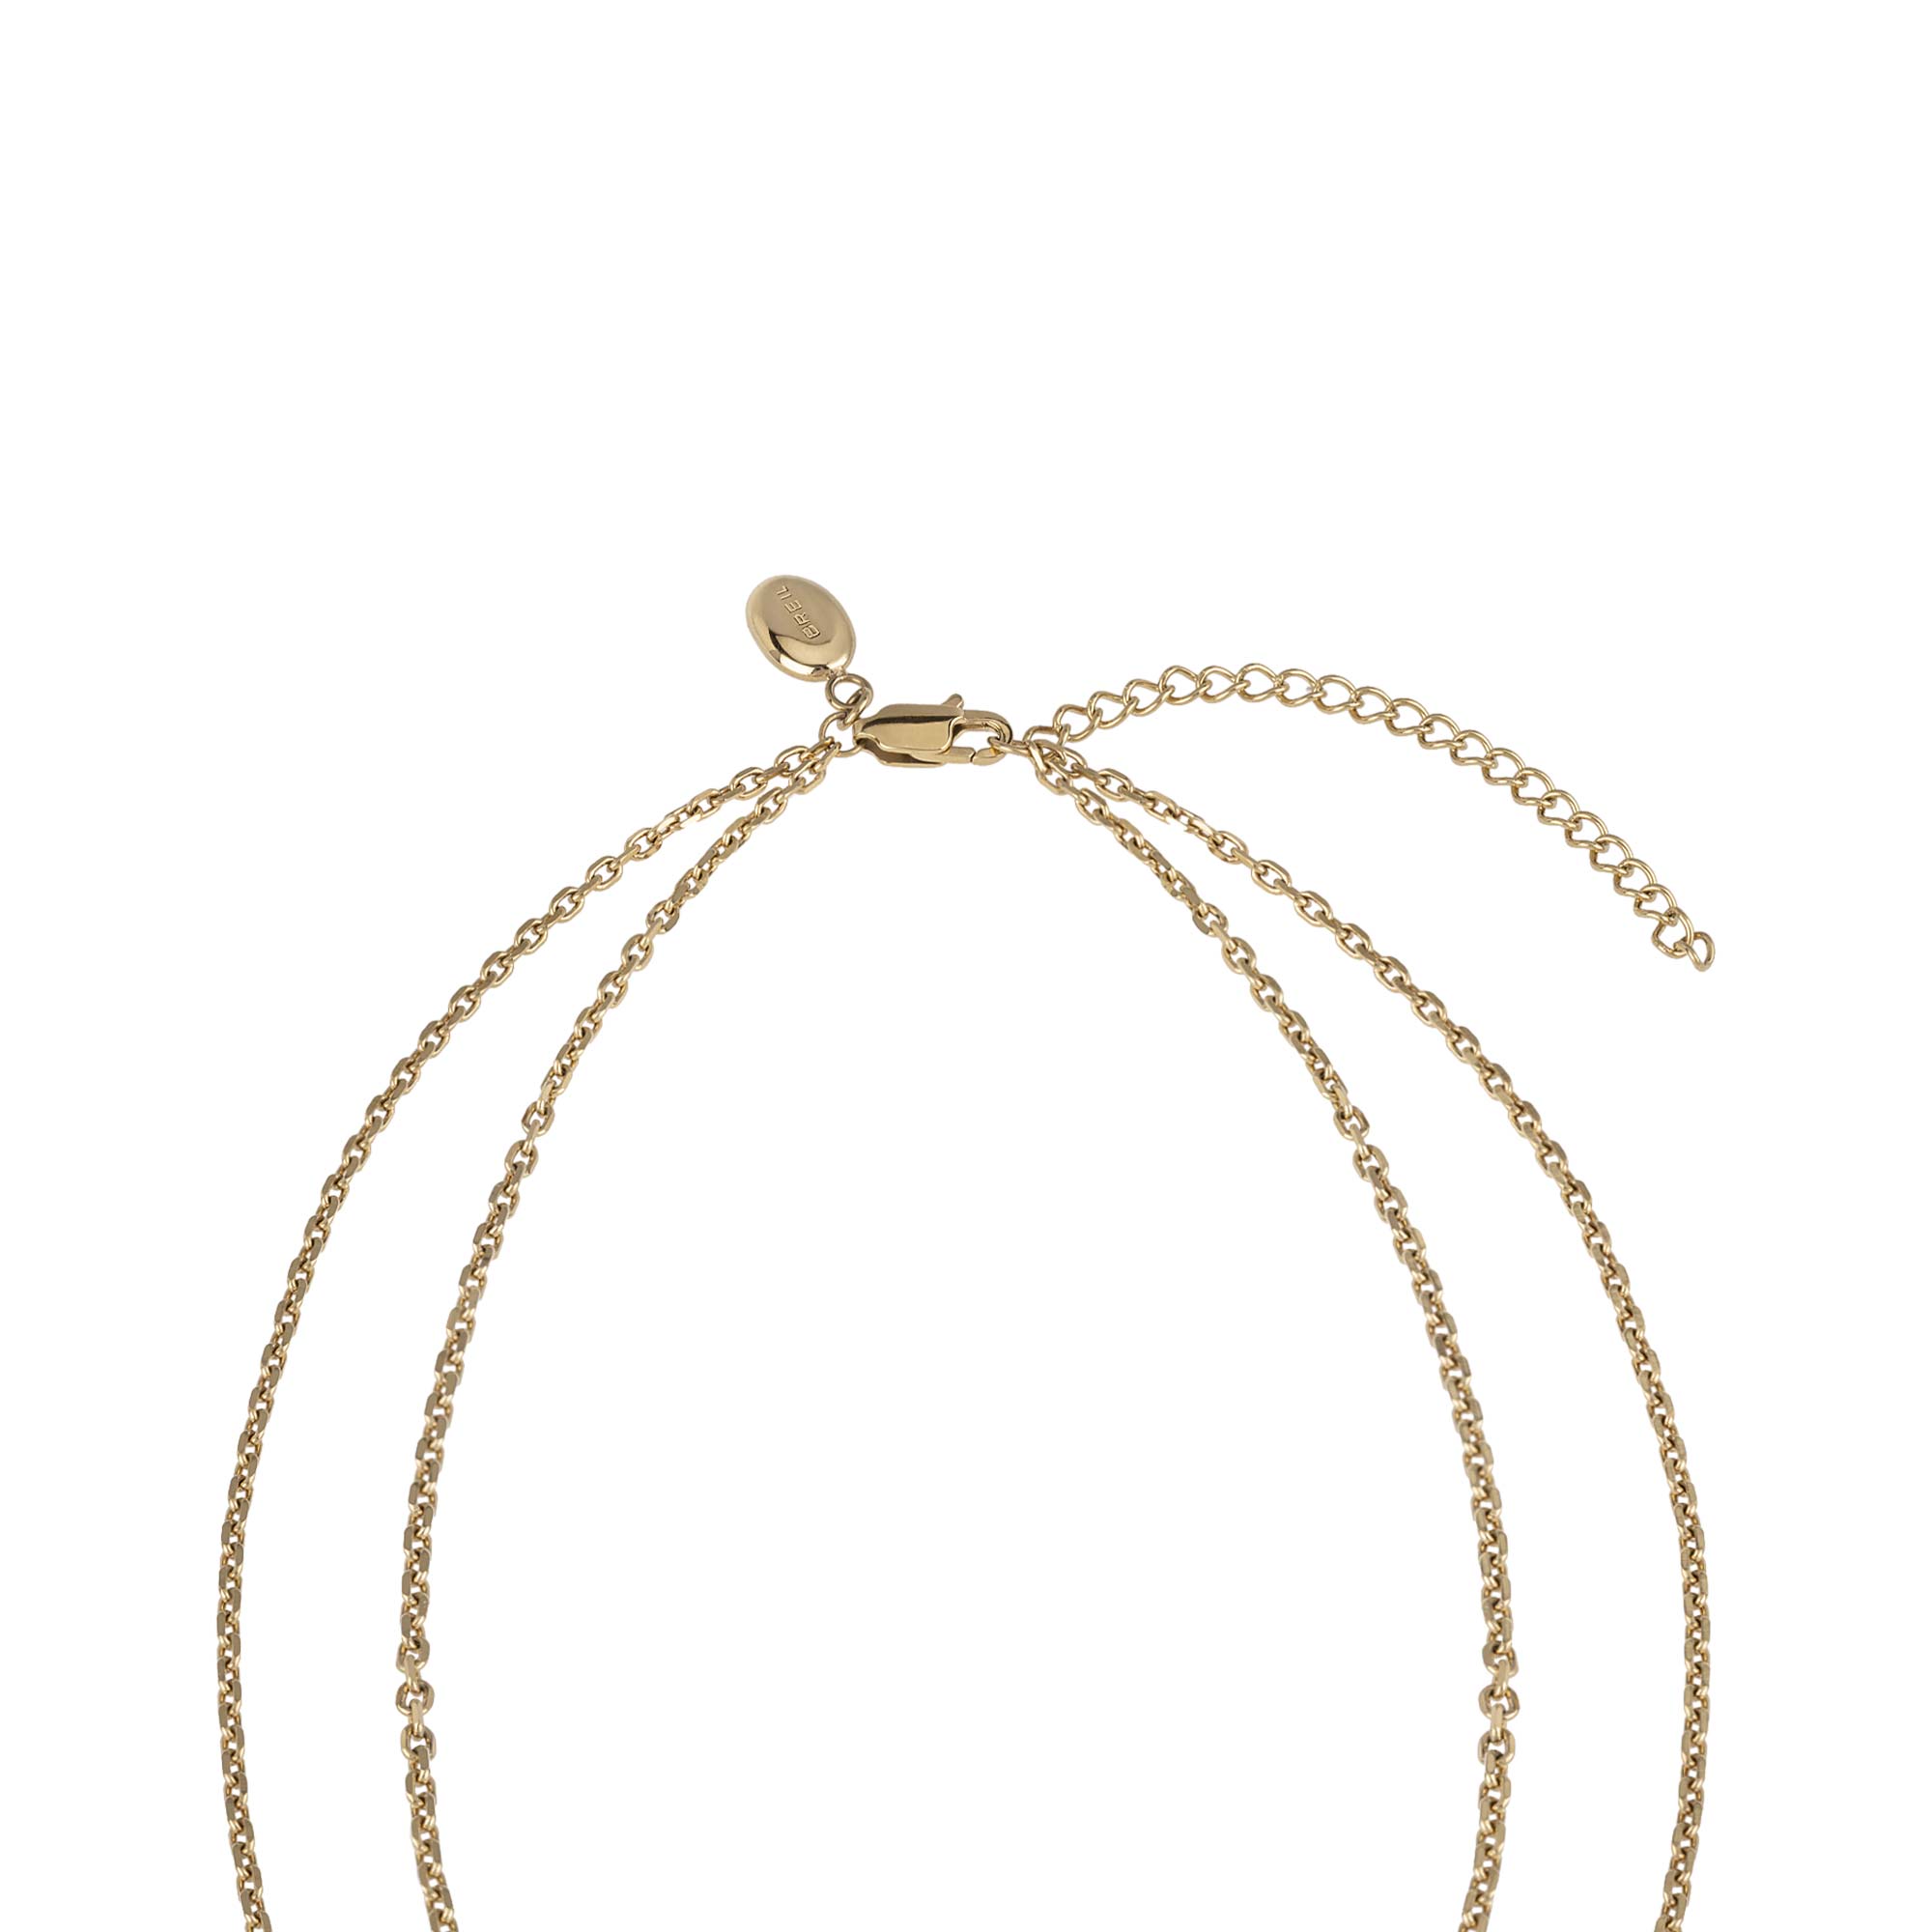 B ESSENTIAL - IP GOLD STEEL NECKLACE WITH NATURAL DIAMOND - 3 - TJ3010 | Breil